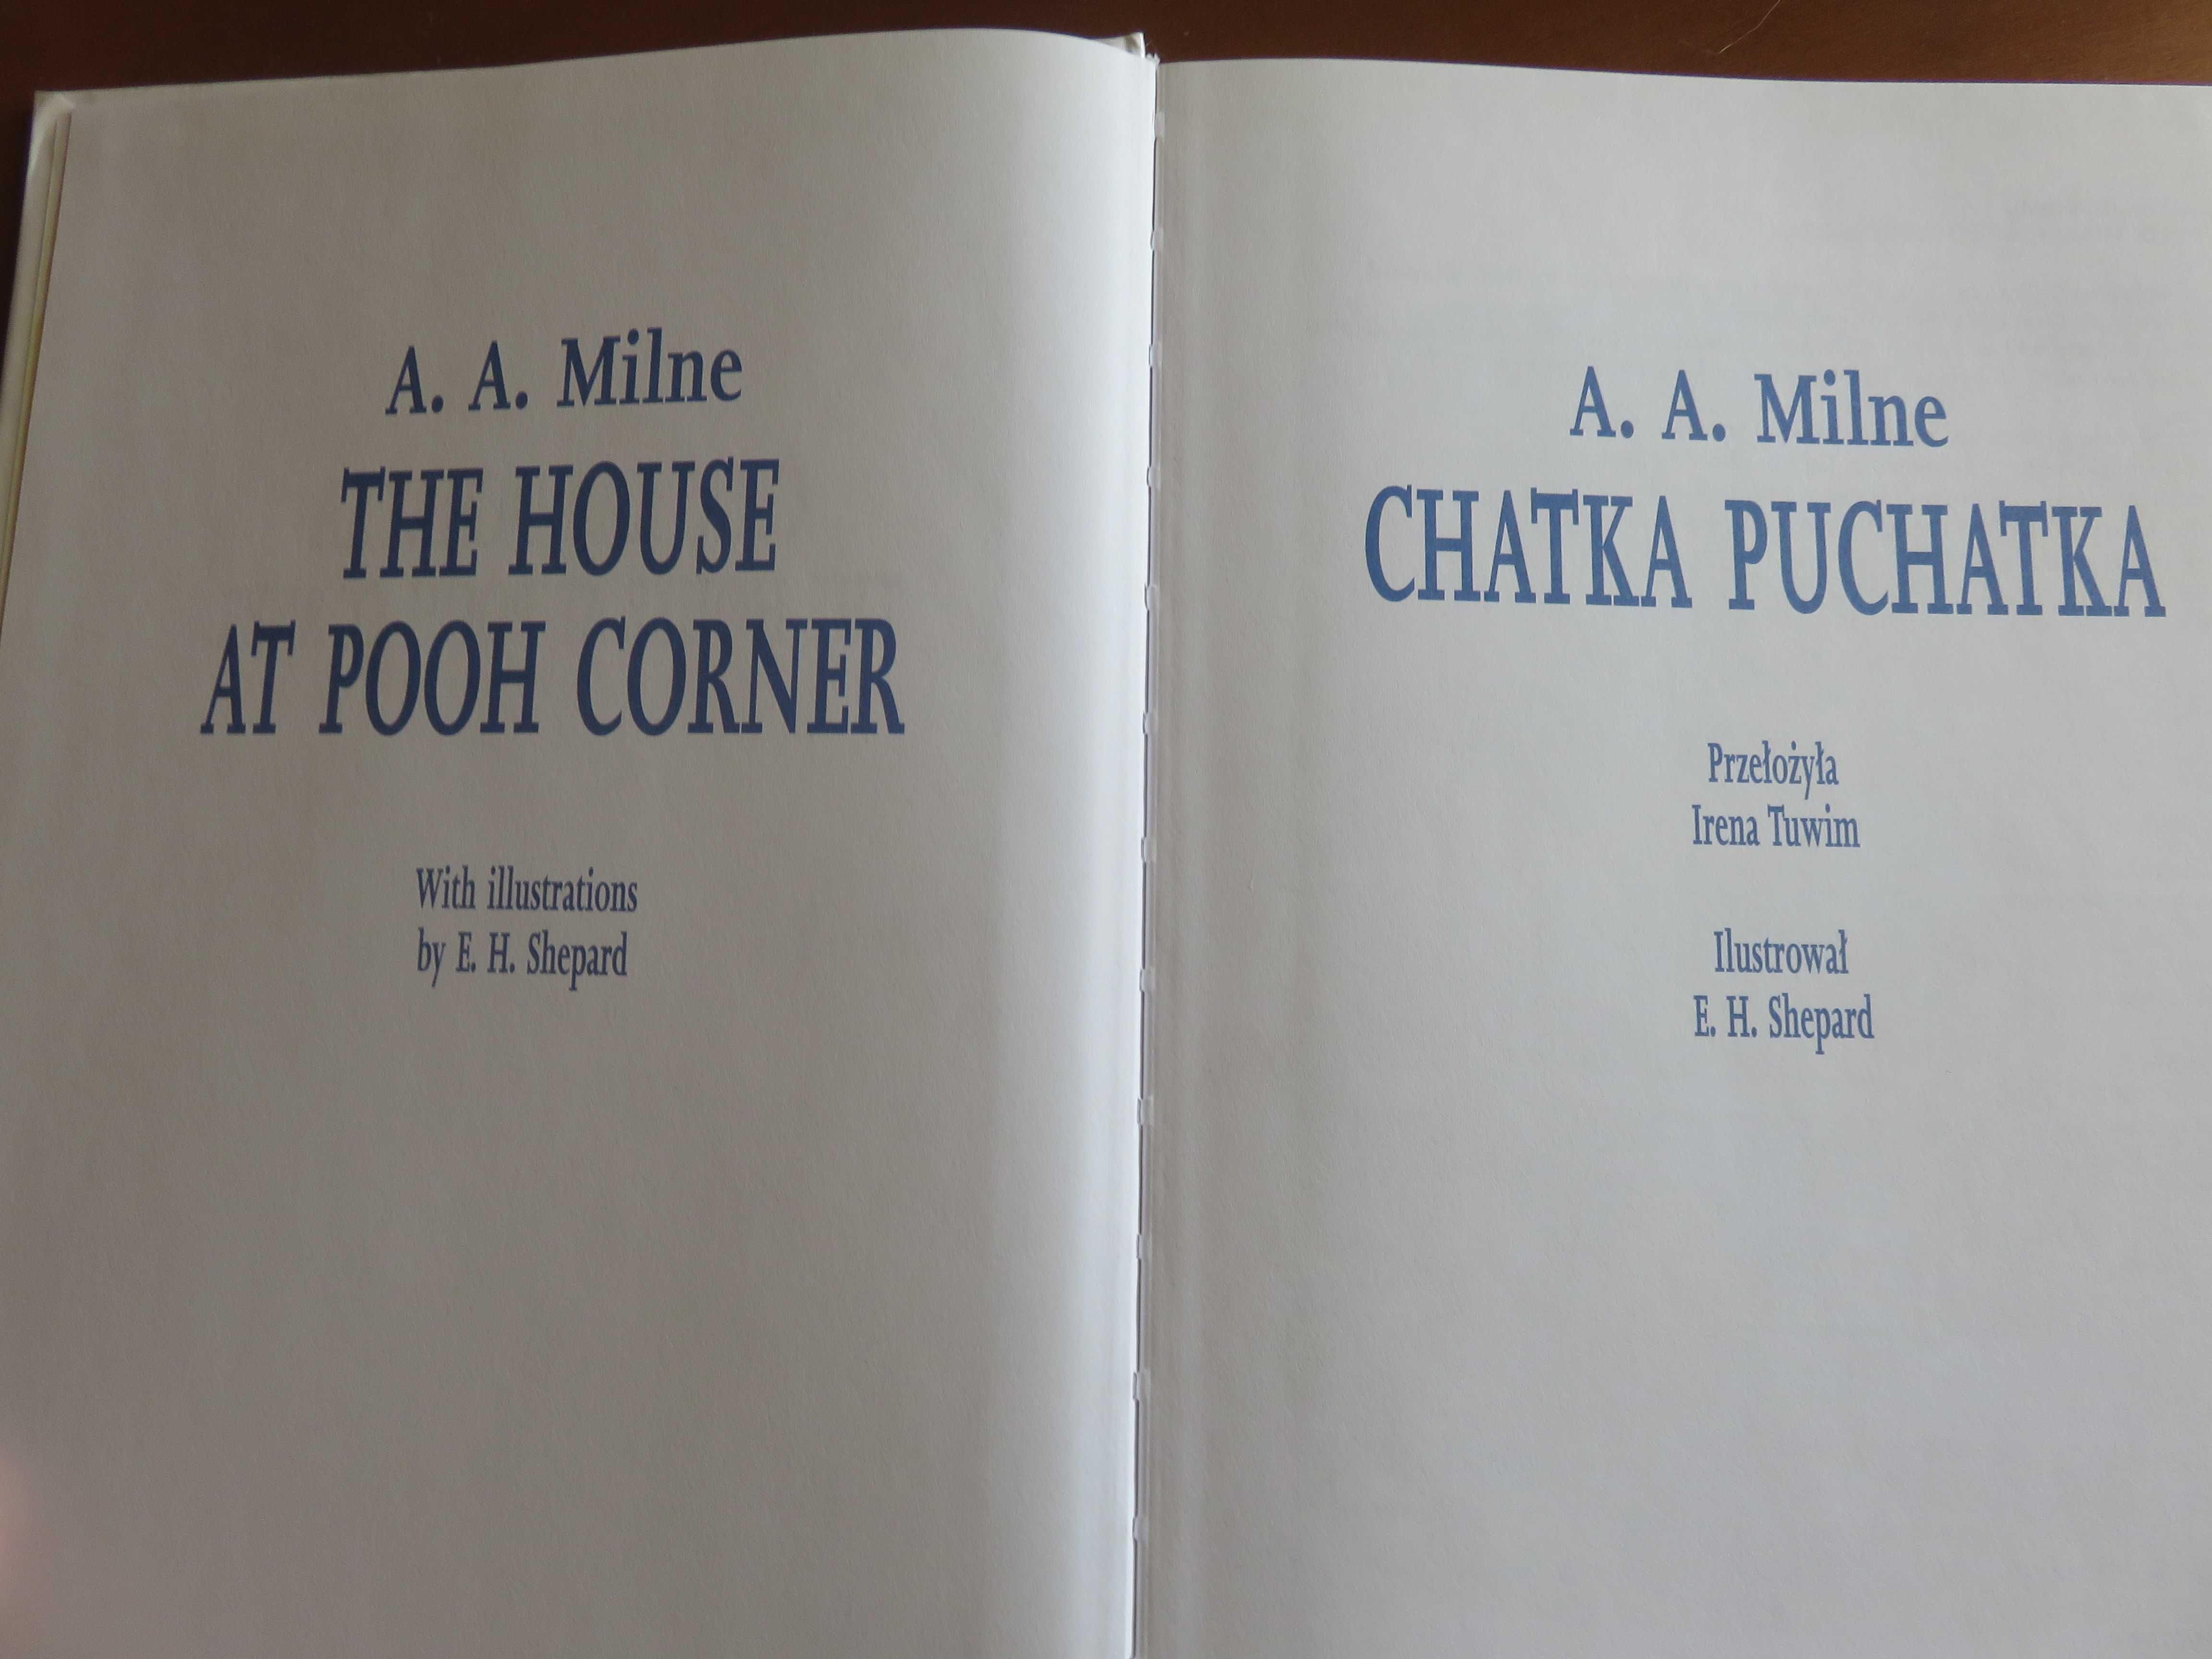 Chatka Puchatka  - The house at pooh corner A.a.Milne